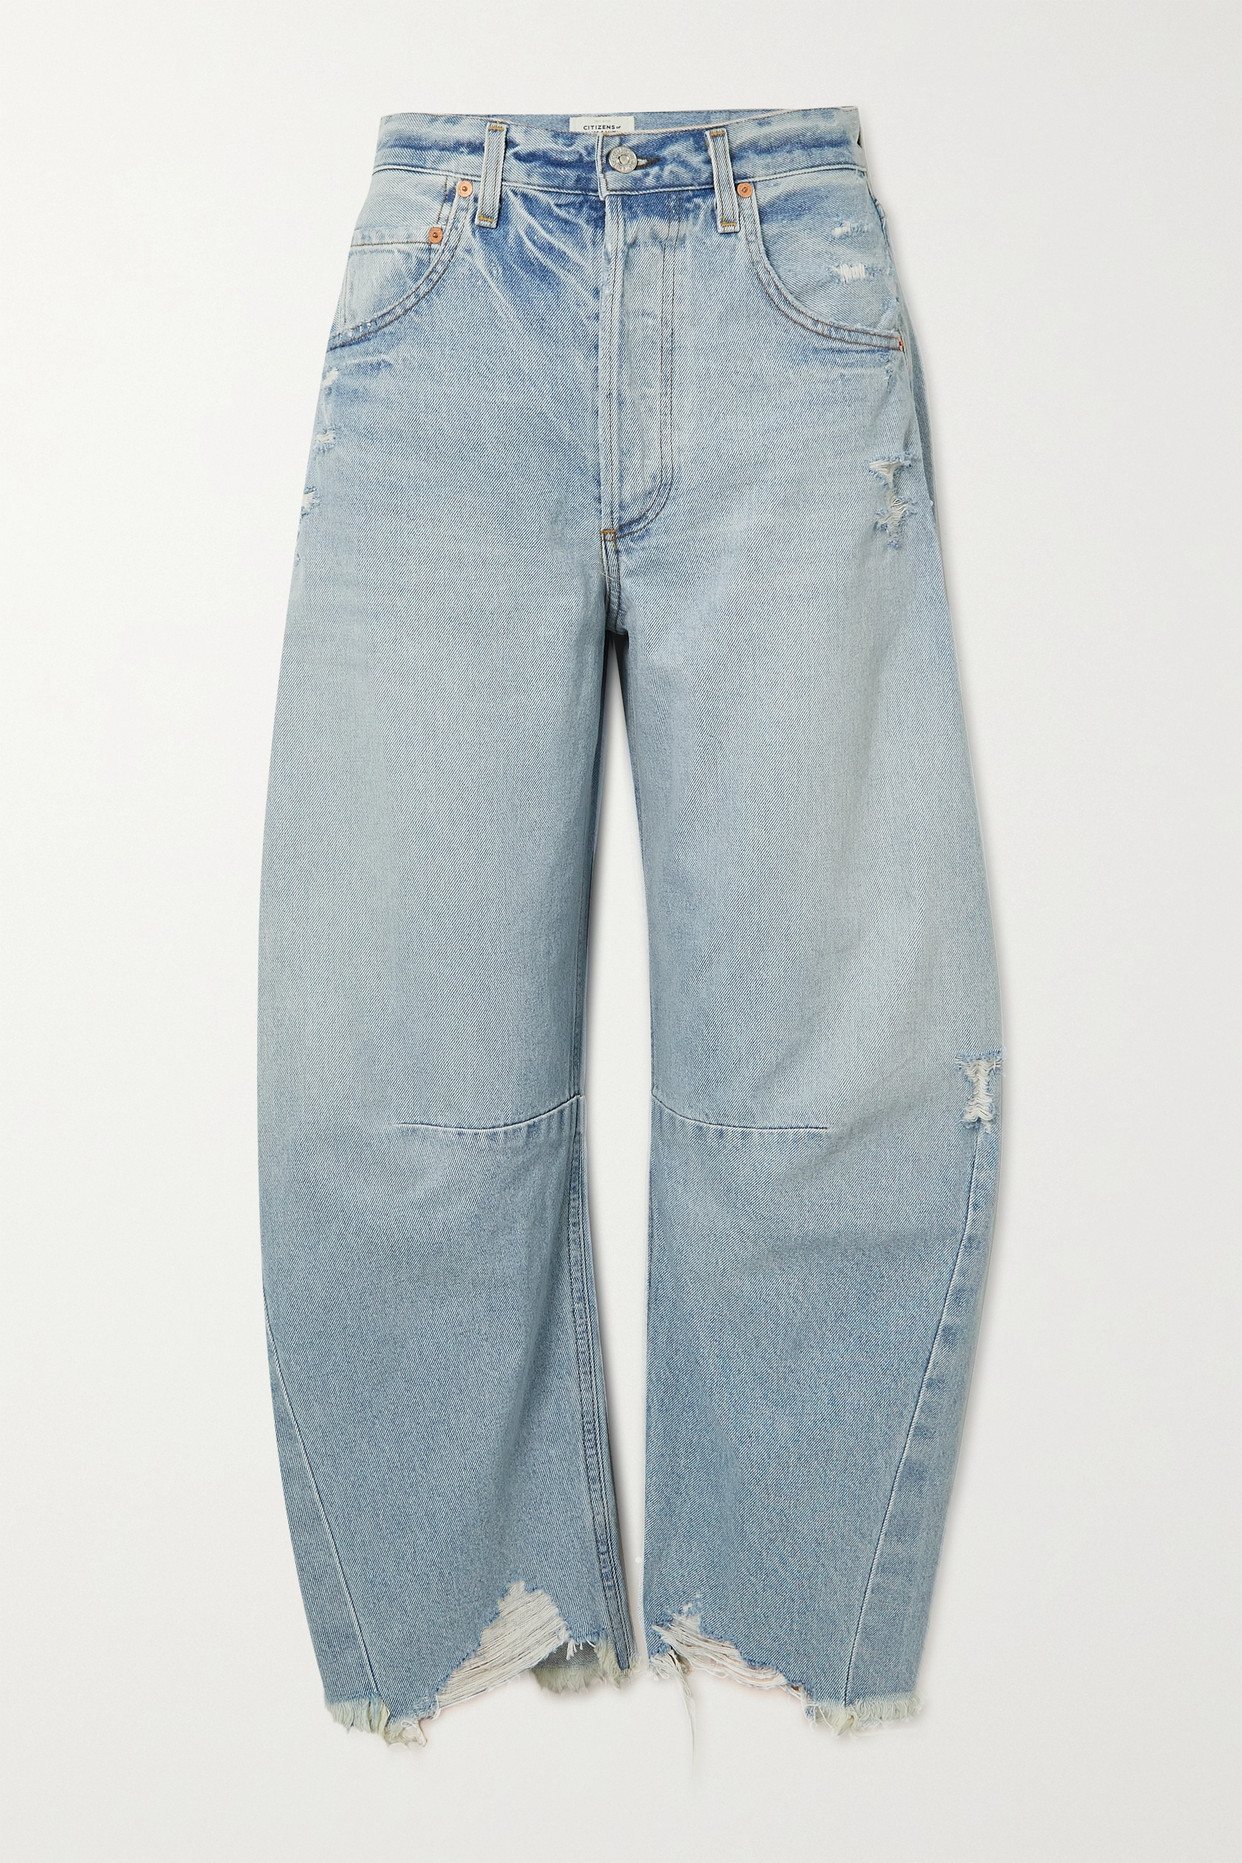 Horseshoe Distressed High-Rise Tapered Jeans